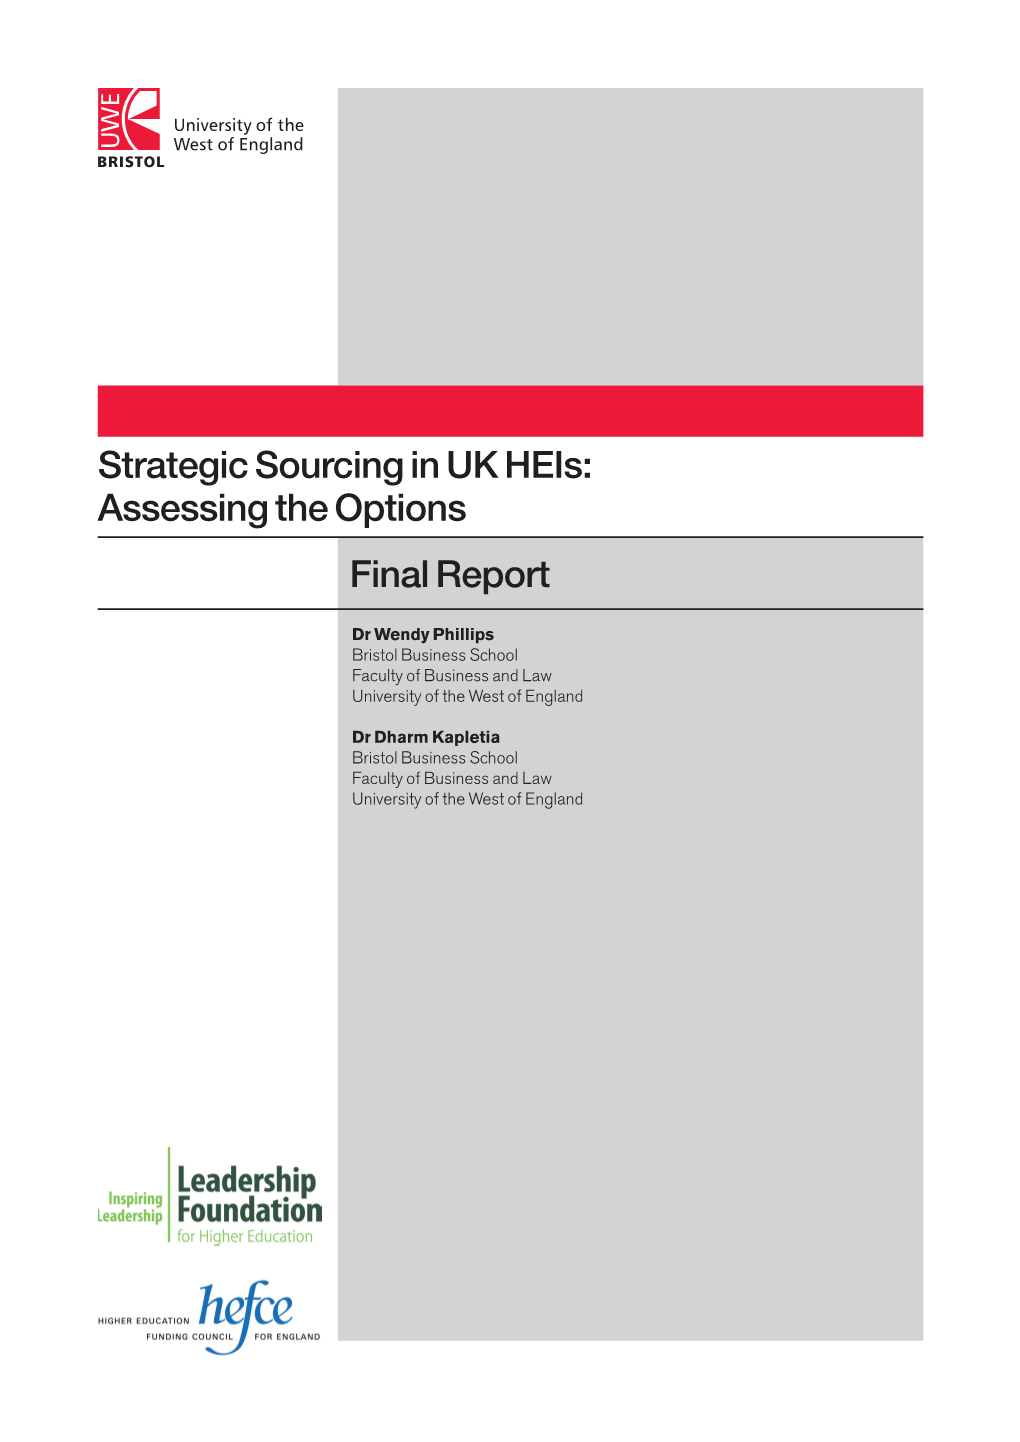 Strategic Sourcing in UK Heis: Assessing the Options Final Report